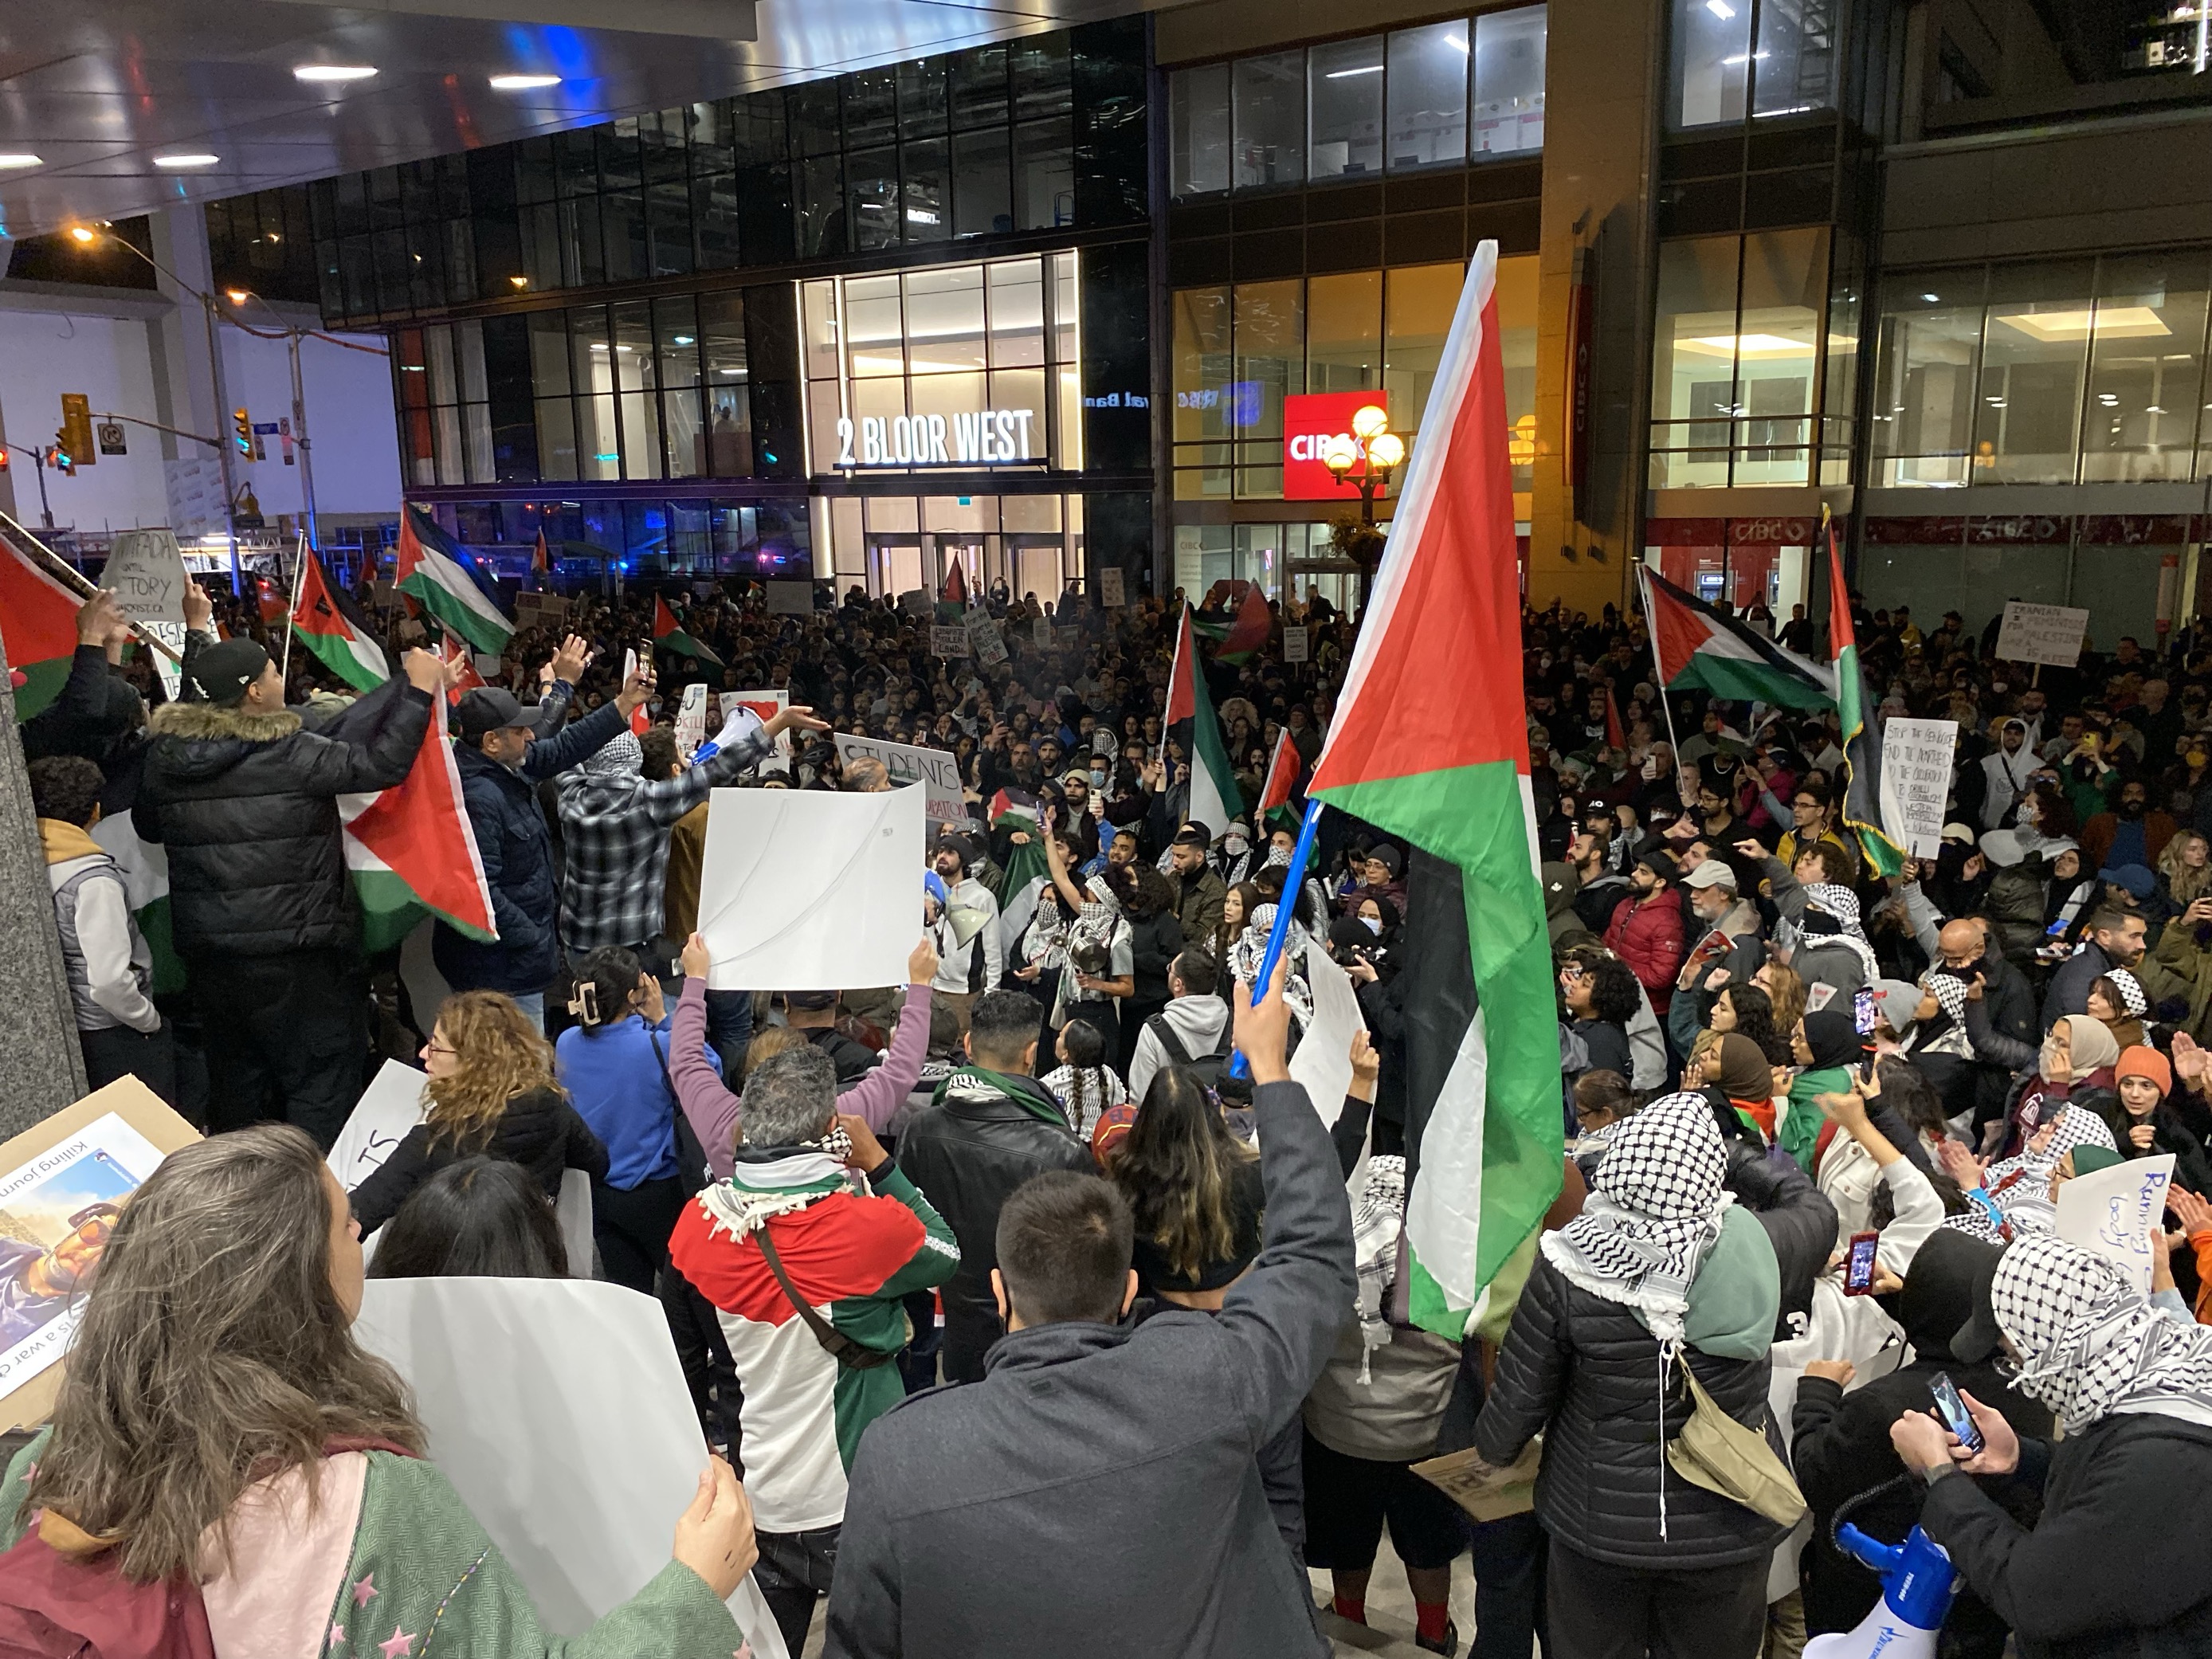 Demonstration over Israel-Hamas conflict shuts down roads in downtown Toronto